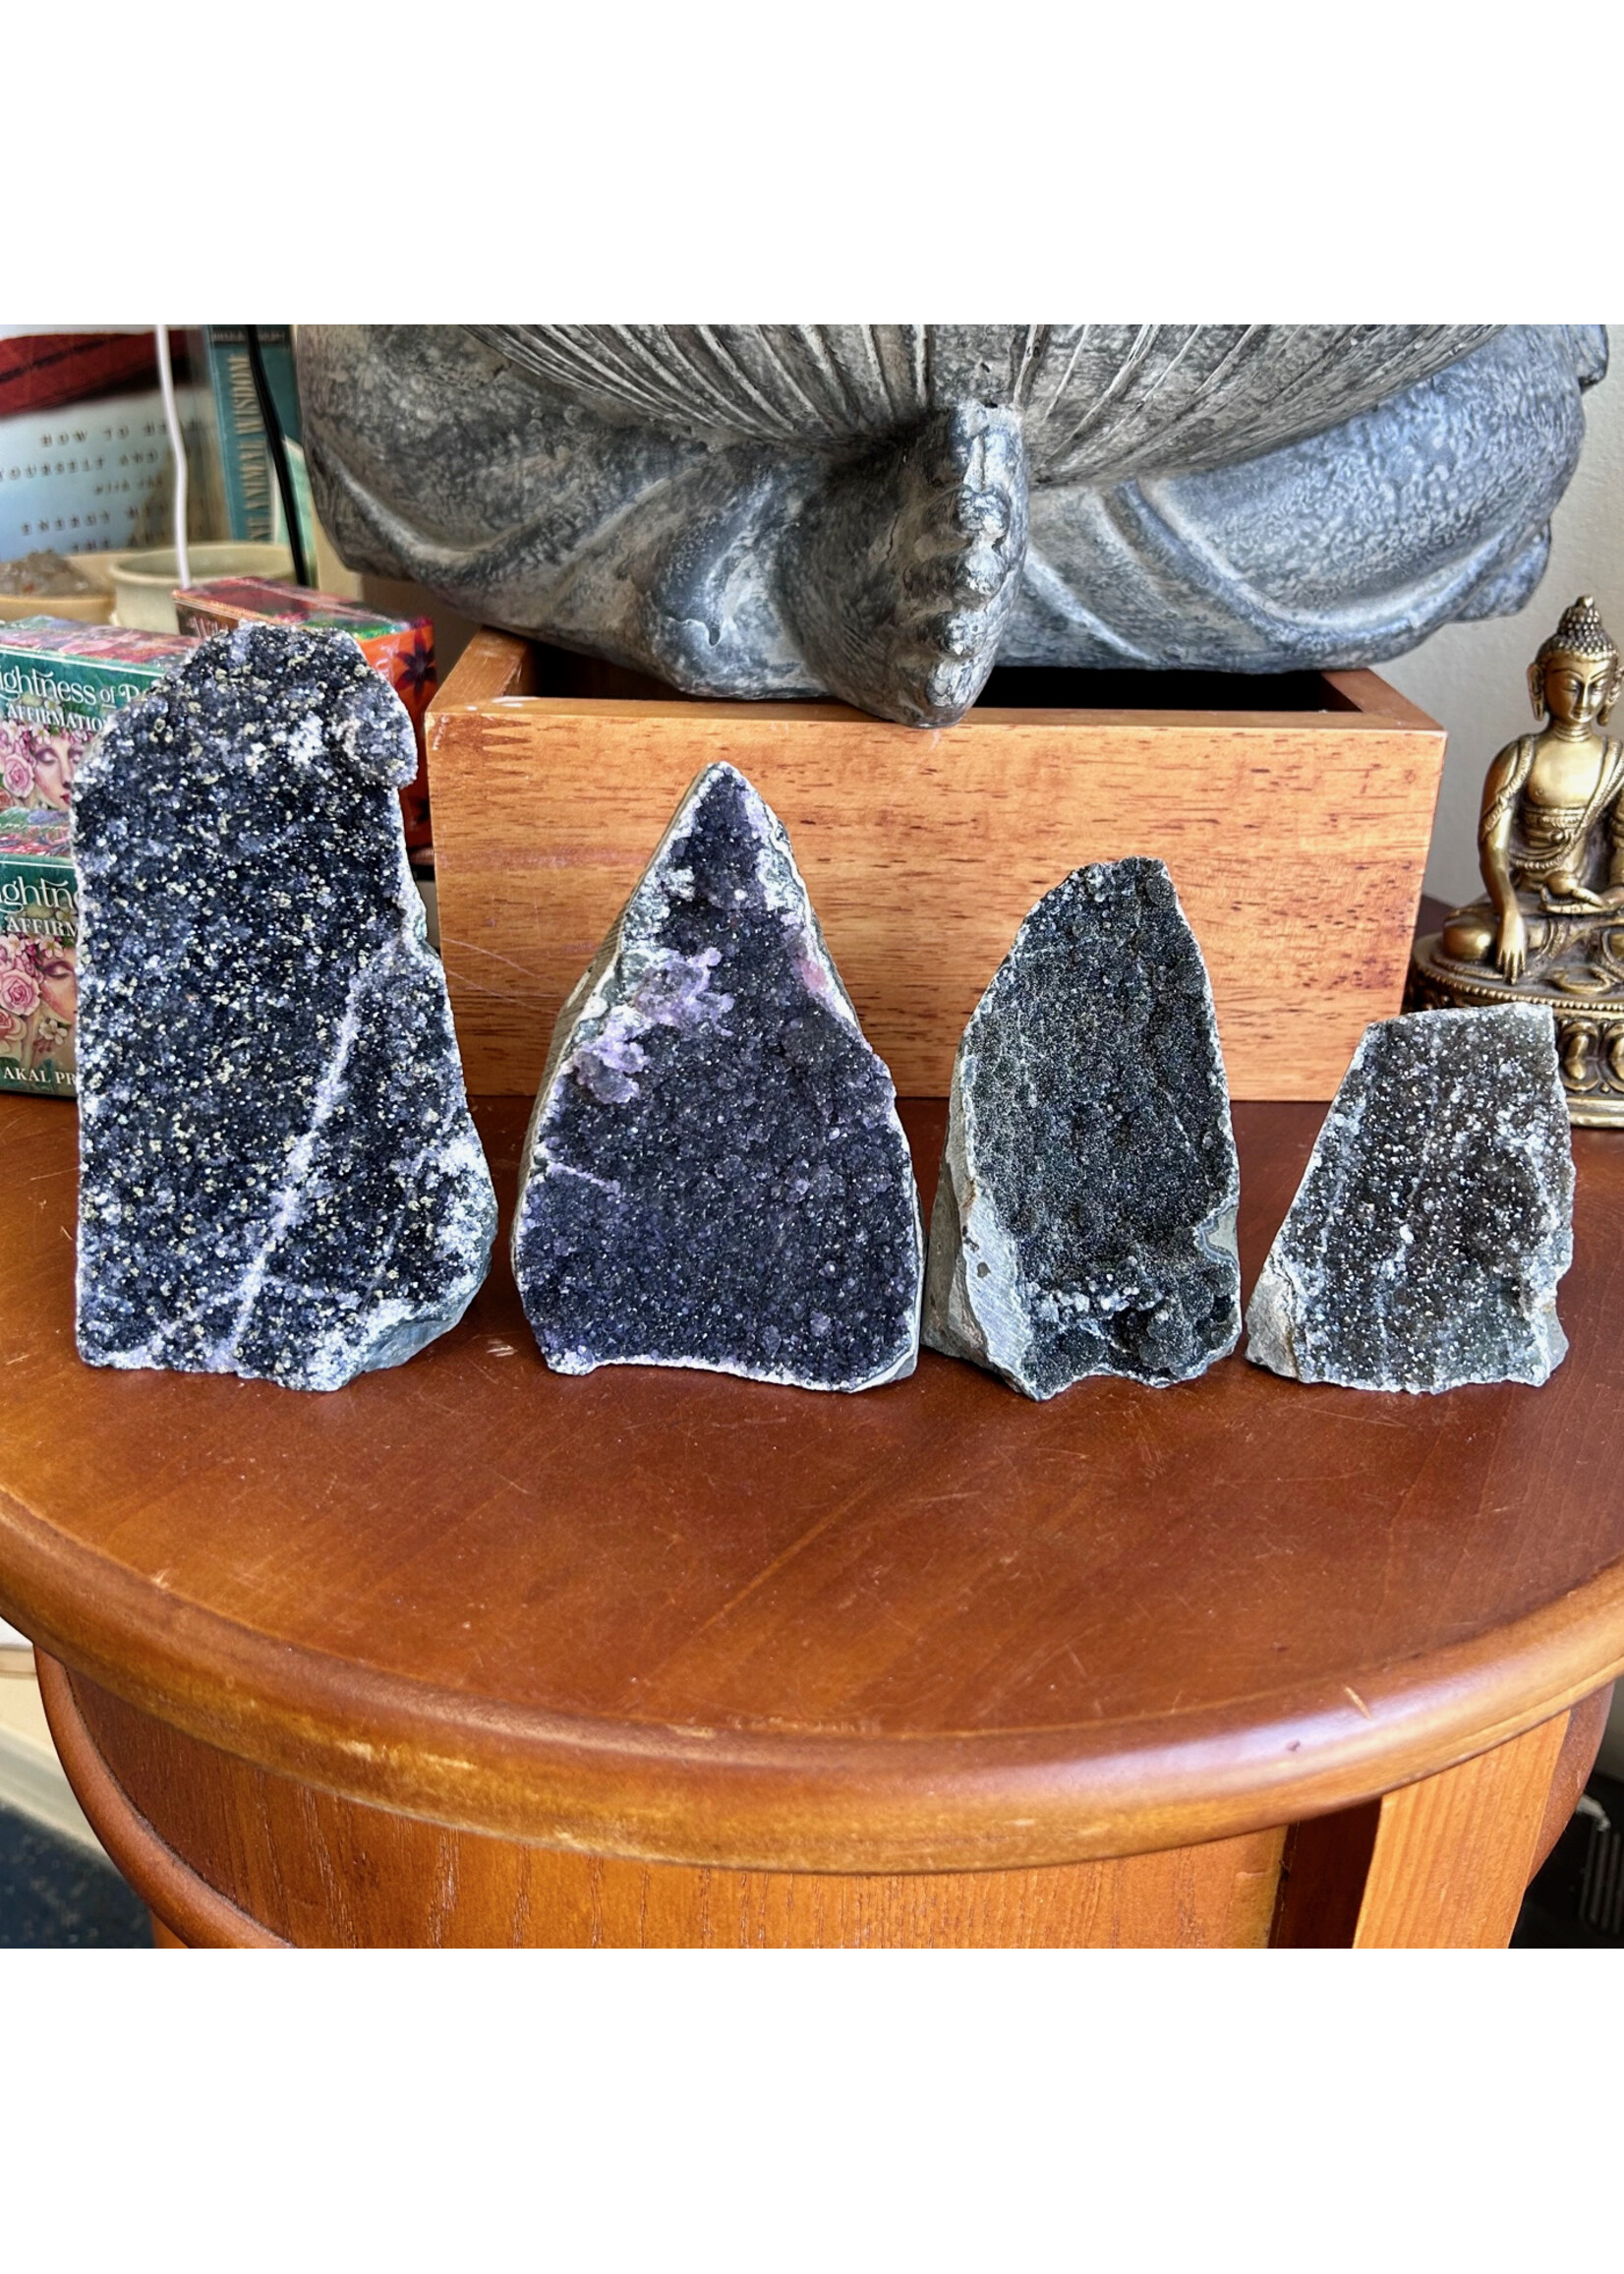 Black Amethyst Clusters for spiritual connection